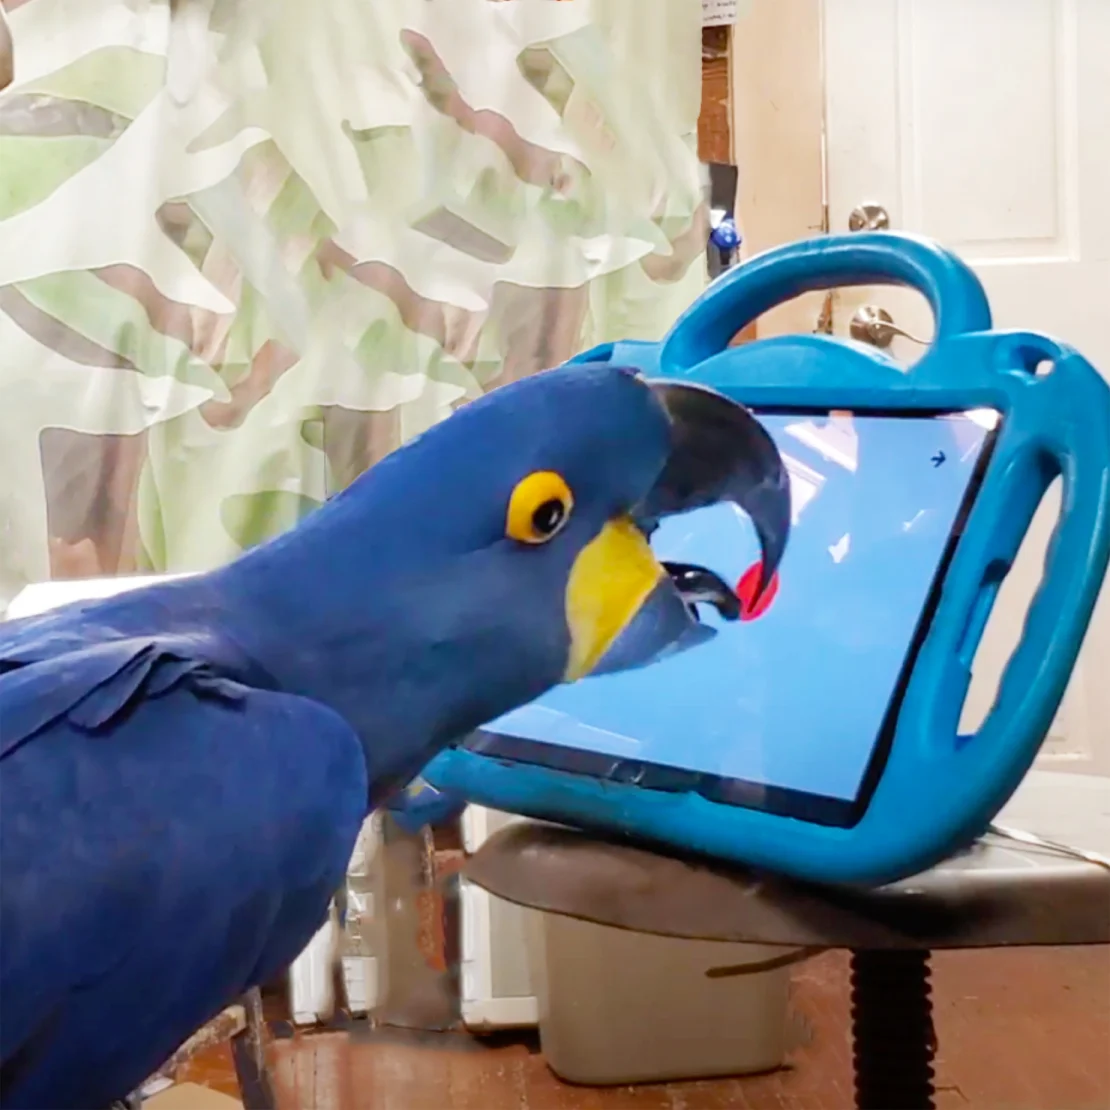 Parrots love to play games 🦜